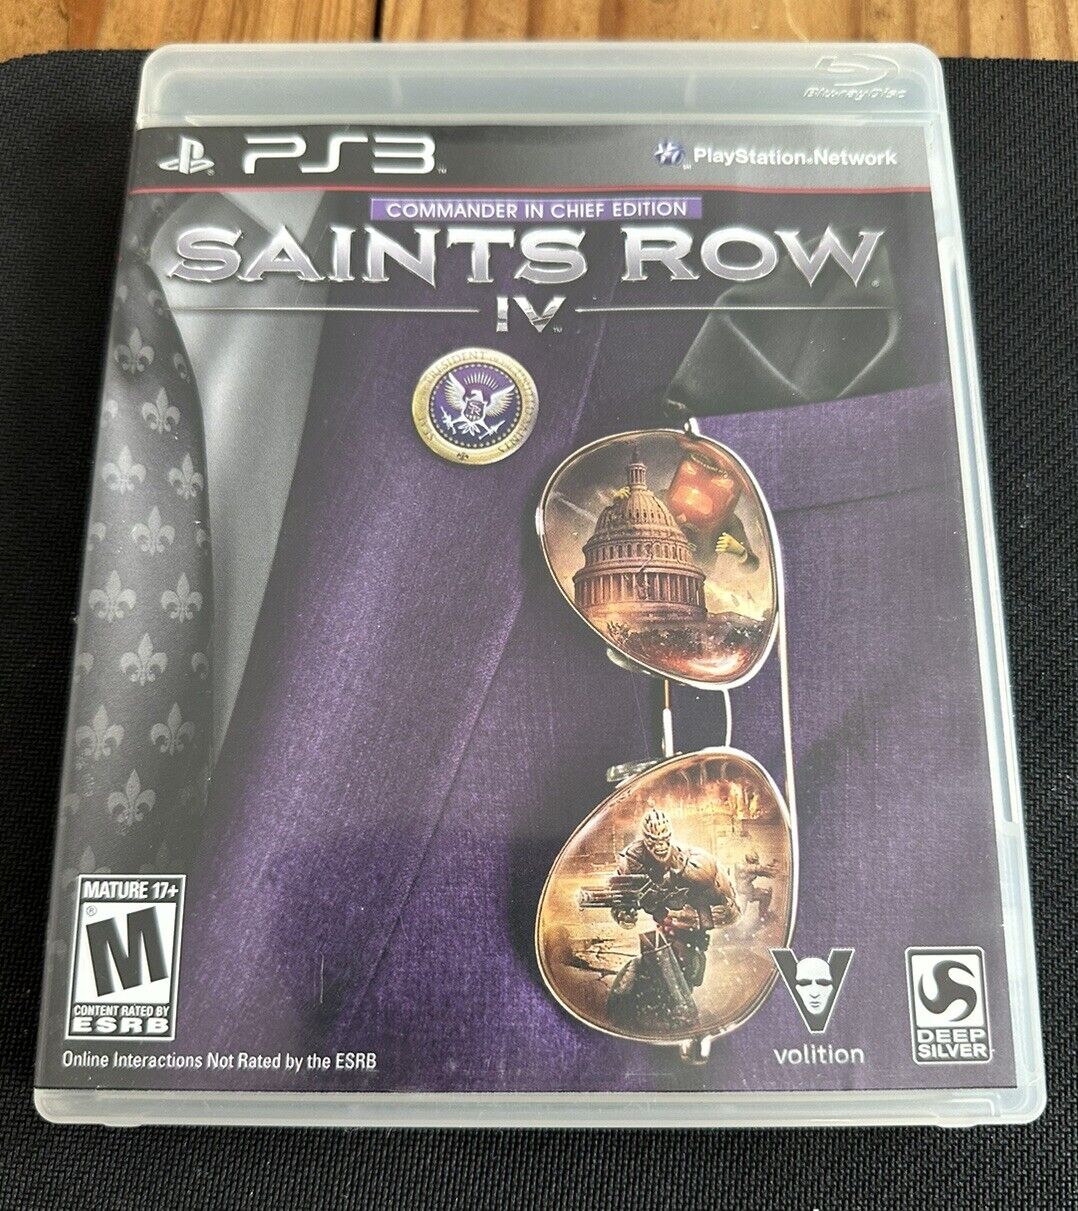 Saints Row IV (Commander in Chief Edition) - PlayStation 3 - Complete - TESTED